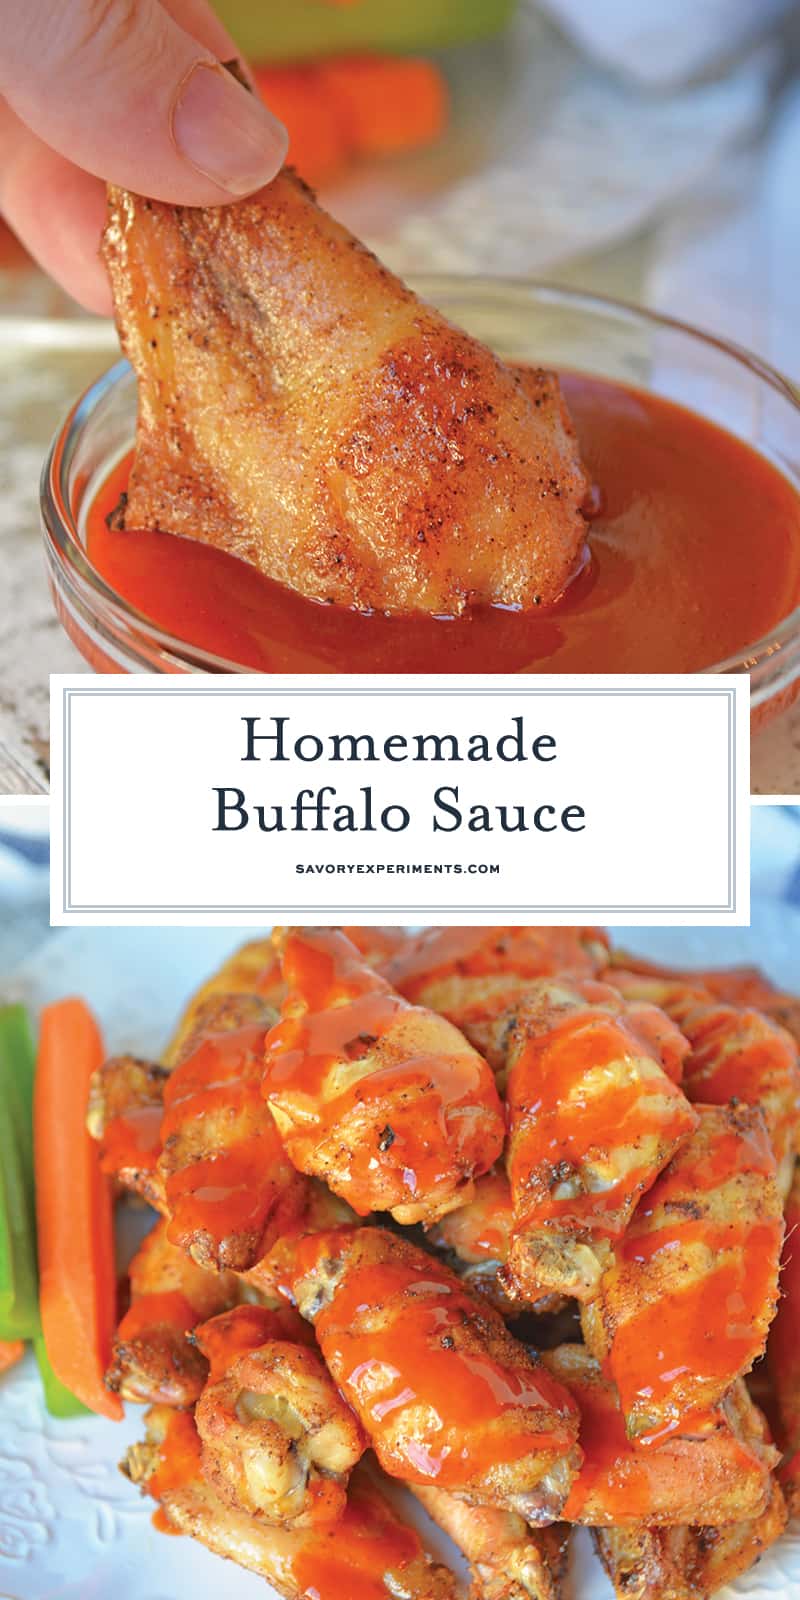 Homemade Buffalo Sauce is an easy blend of just two ingredients! Use other buffalo sauce ingredients to make fun twists for all your buffalo recipes! #buffalosauce #buffalosaucerecipe www.savoryexperiments.com 